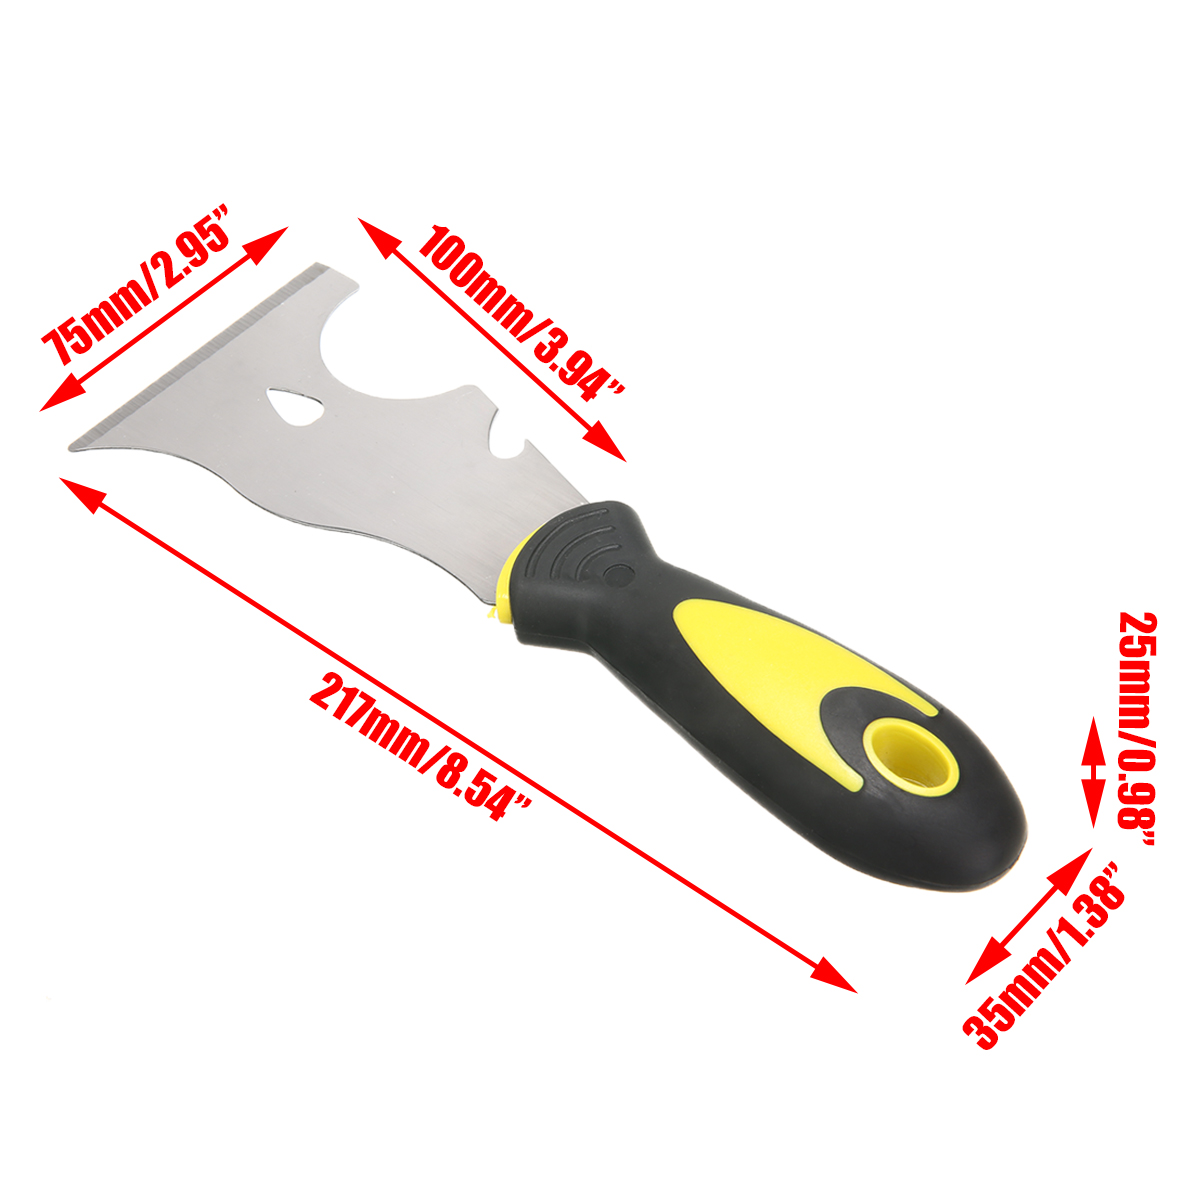 Multi Purpose Scraper Window Glazing Chisel Scraper Squeegees Bead Removal Household Cleaning Tools